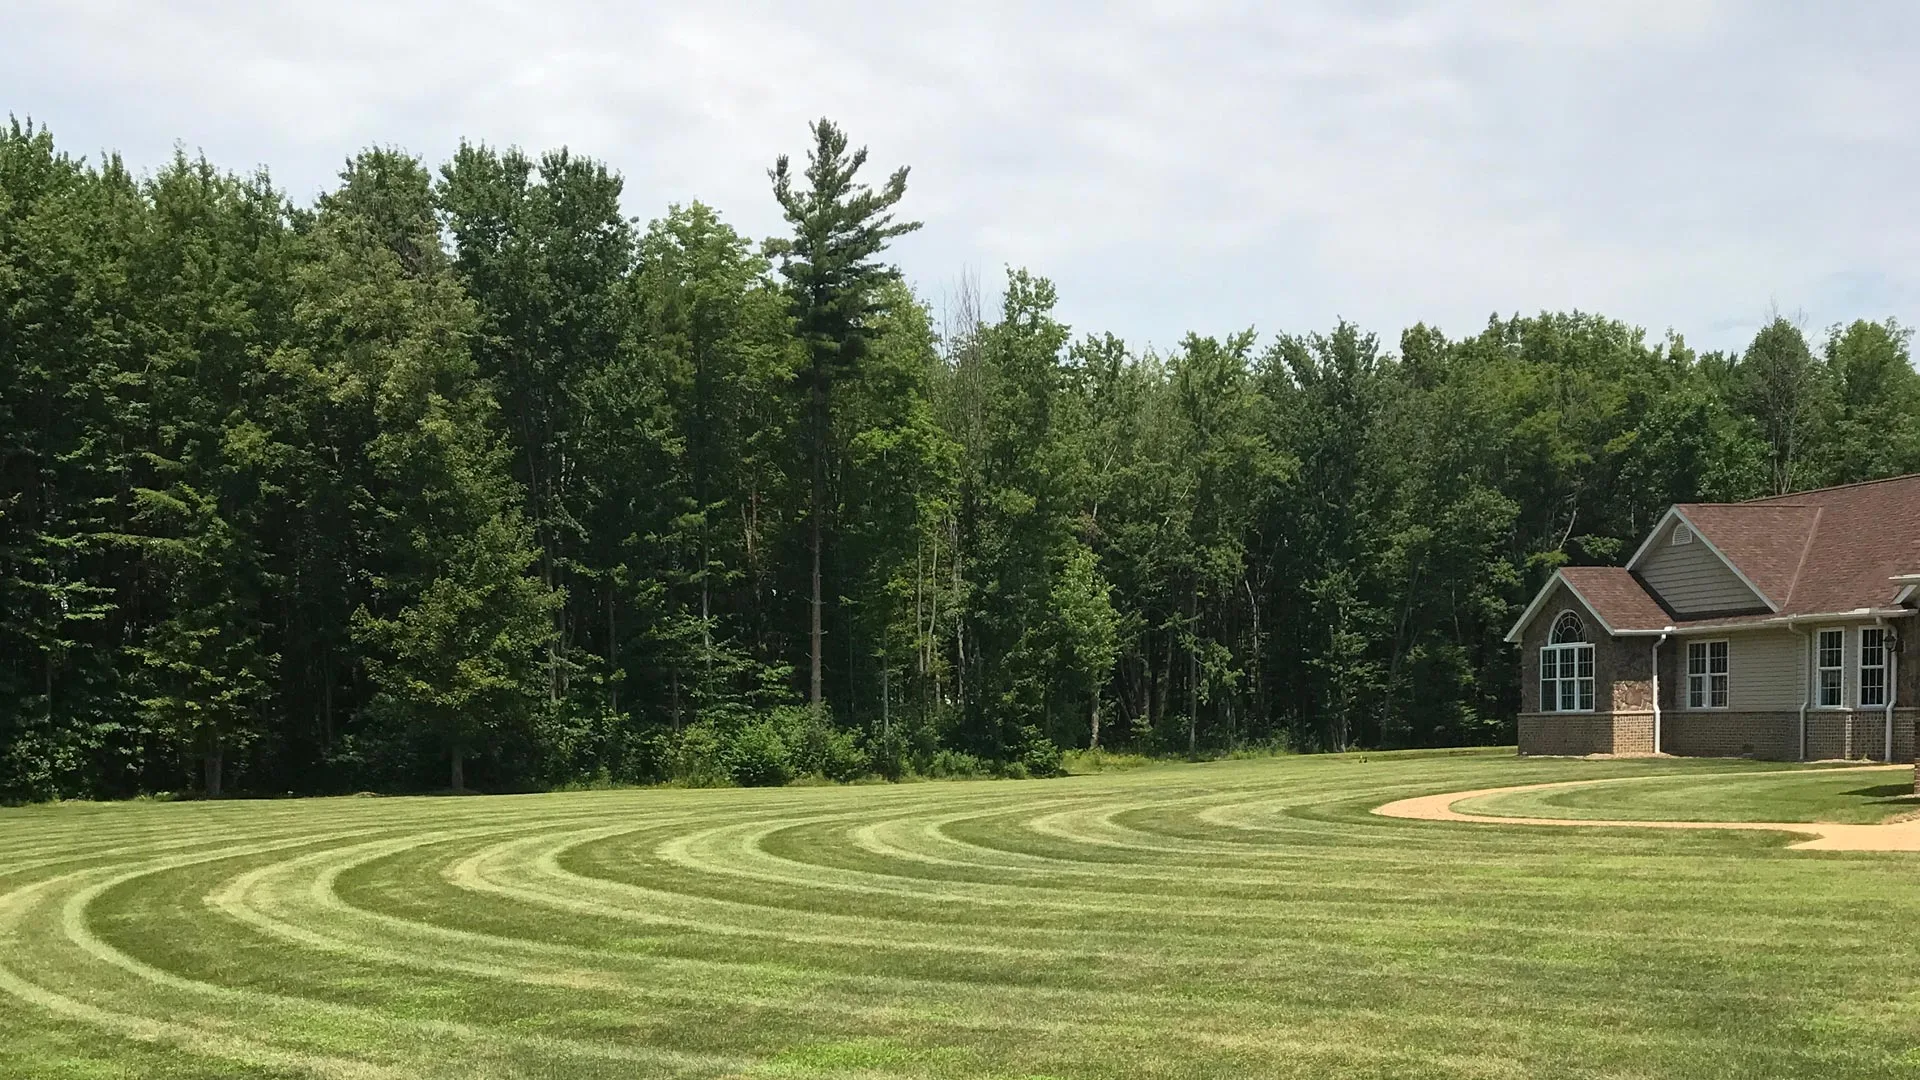 Professionally mowed lawn with stripes at a large property in Ashtabula, OH.